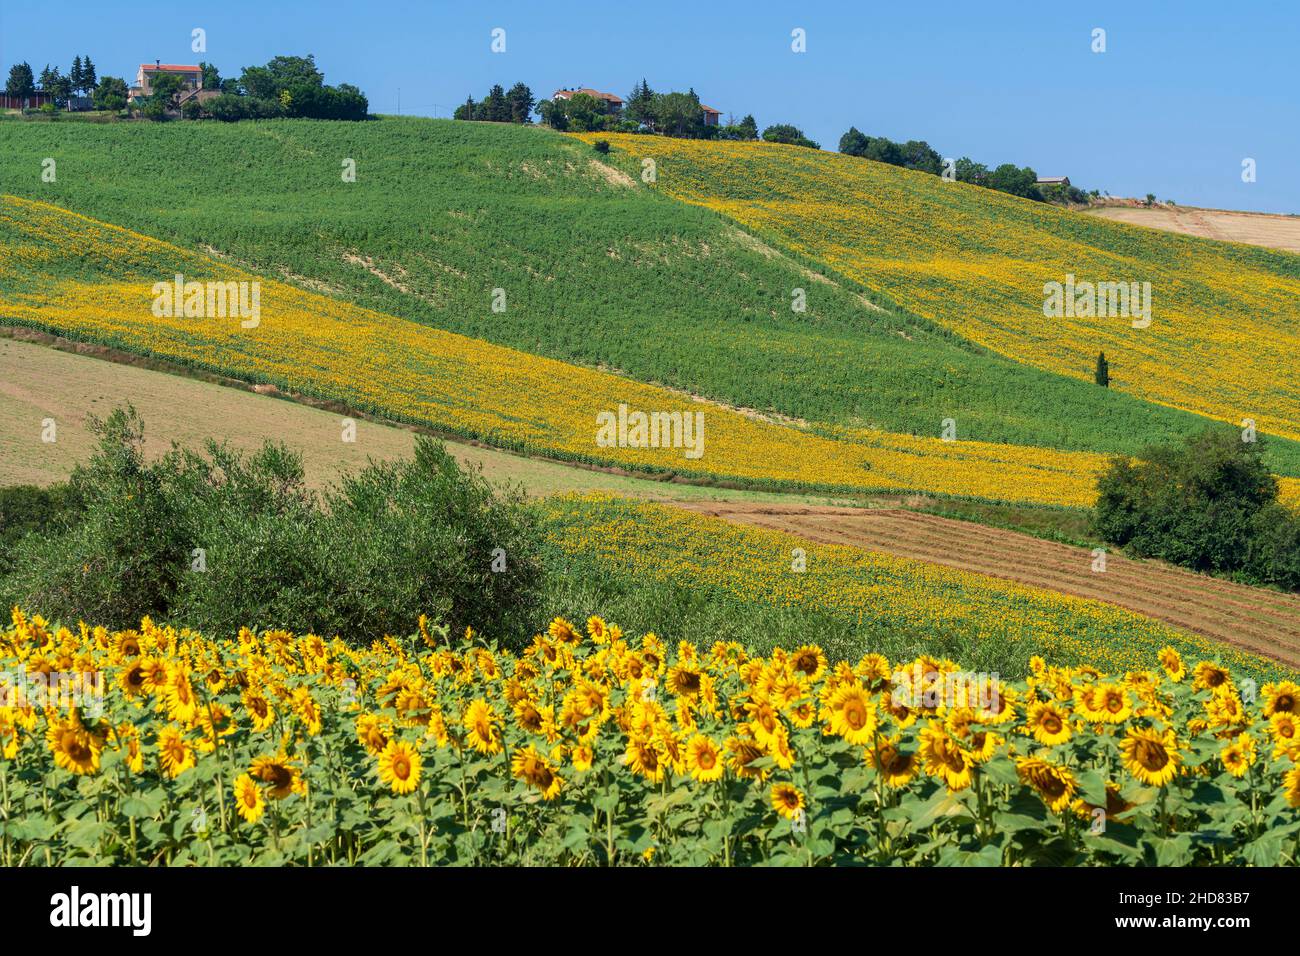 Countryside, Field of Sunflowers, Corridonia, Marche, Italy, Europe Stock Photo